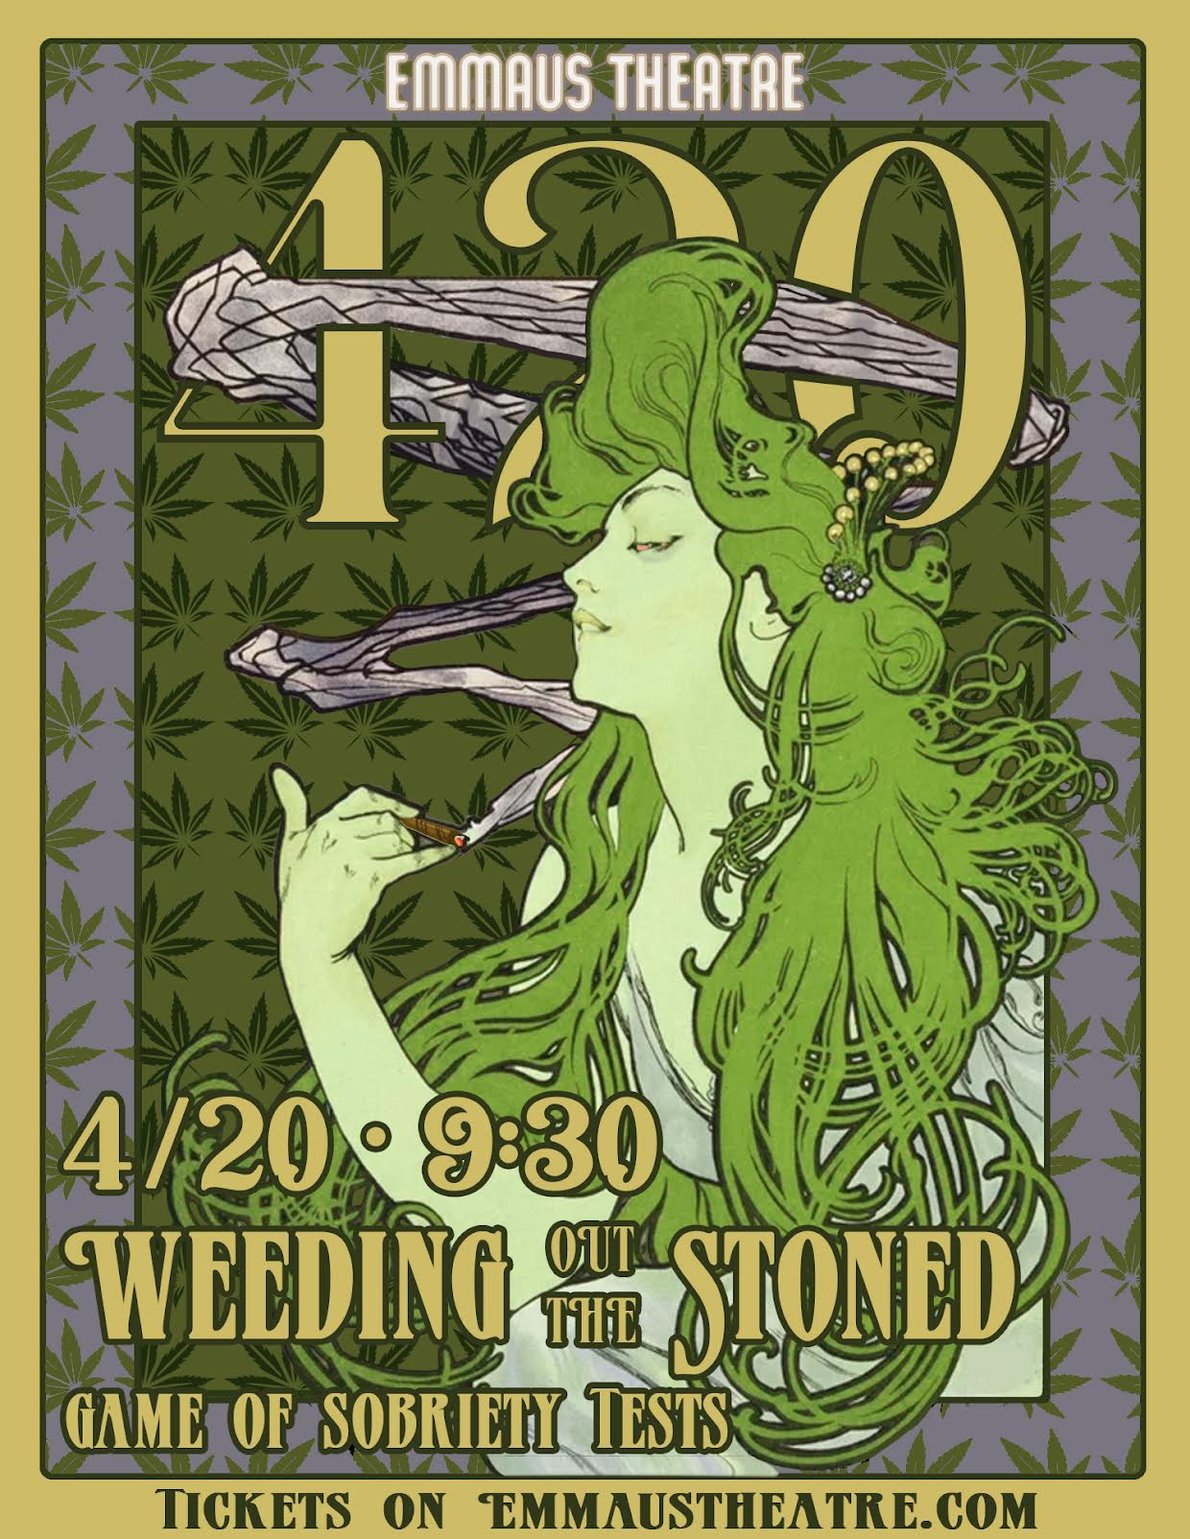 Live Comedy: Weeding Out The Stoned